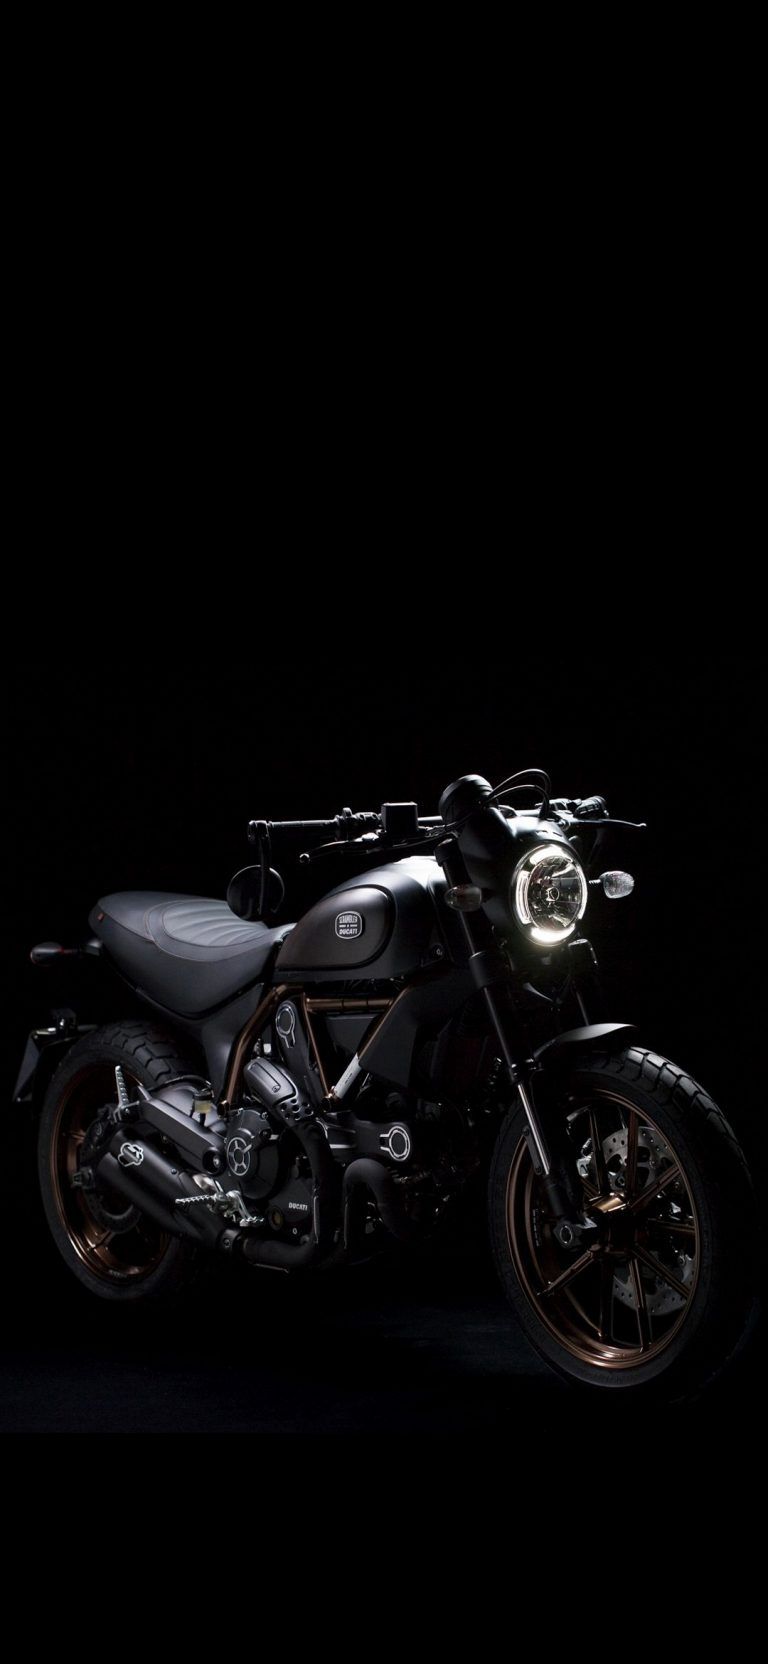 Amoled Motorcycle Wallpapers - Wallpaper Cave